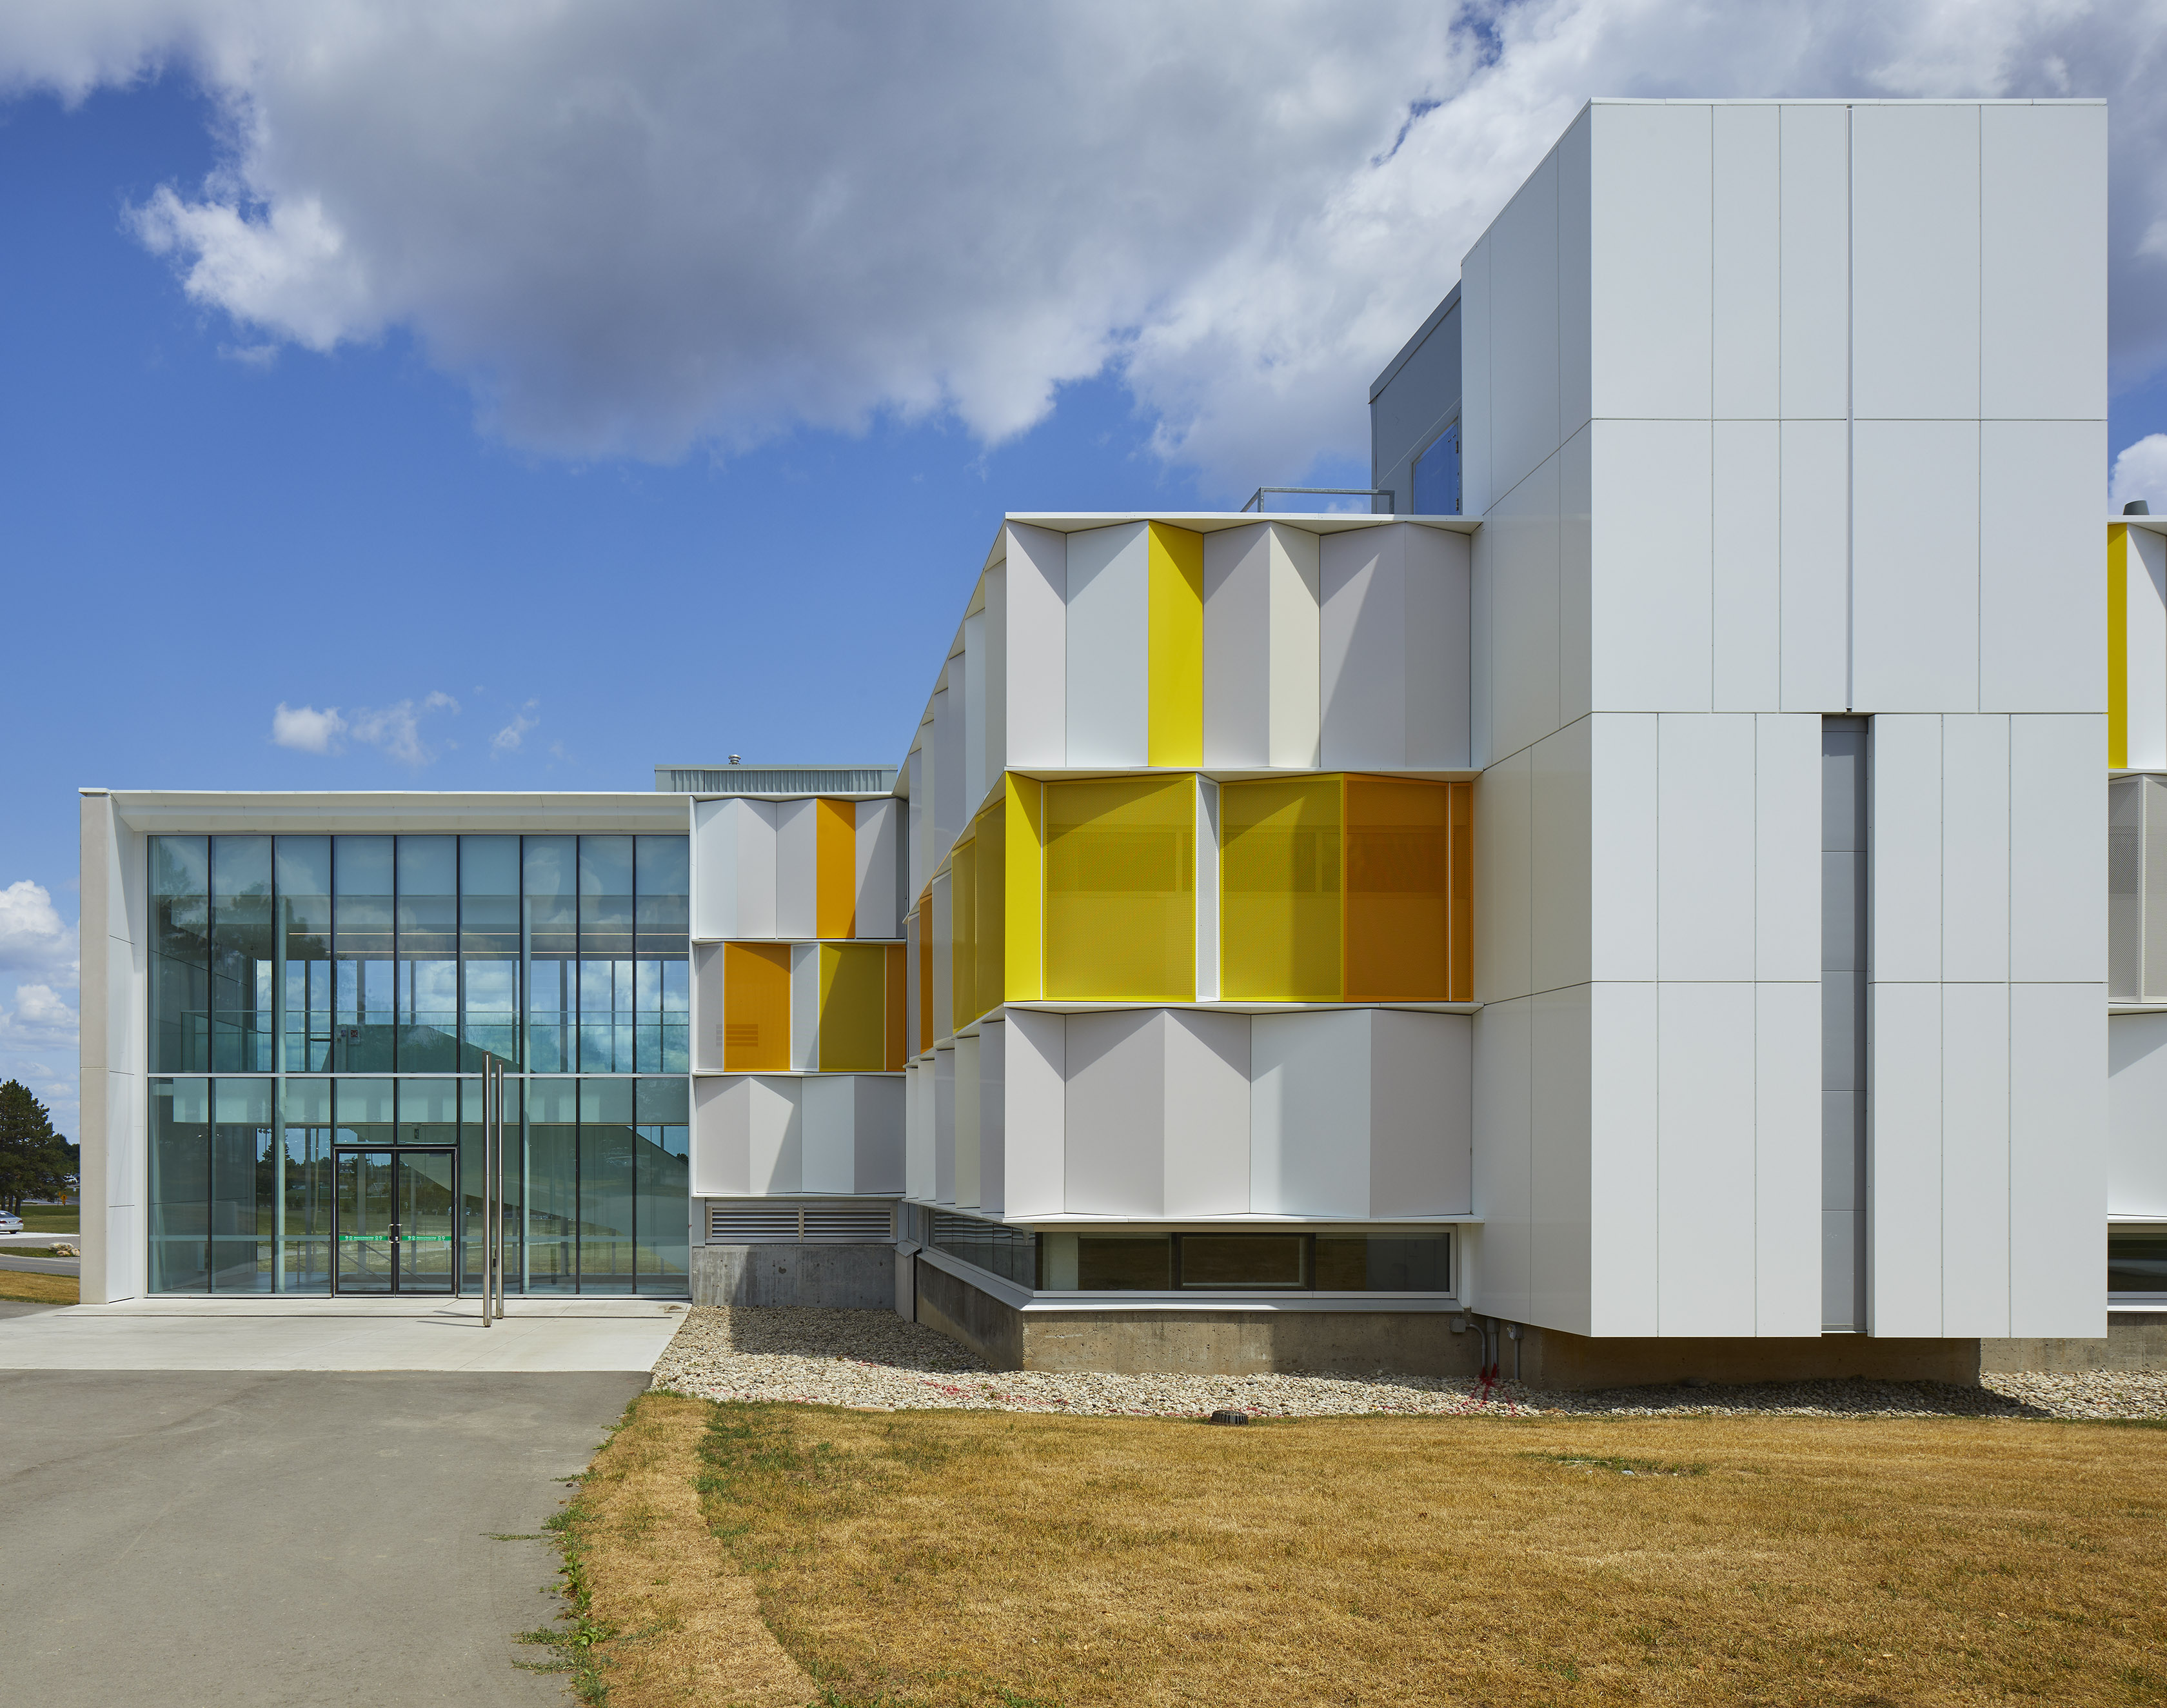 ALPOLIC MCM cladding on the renovated envelope of Fleming College A Wing building, installed at angles for aesthetic design